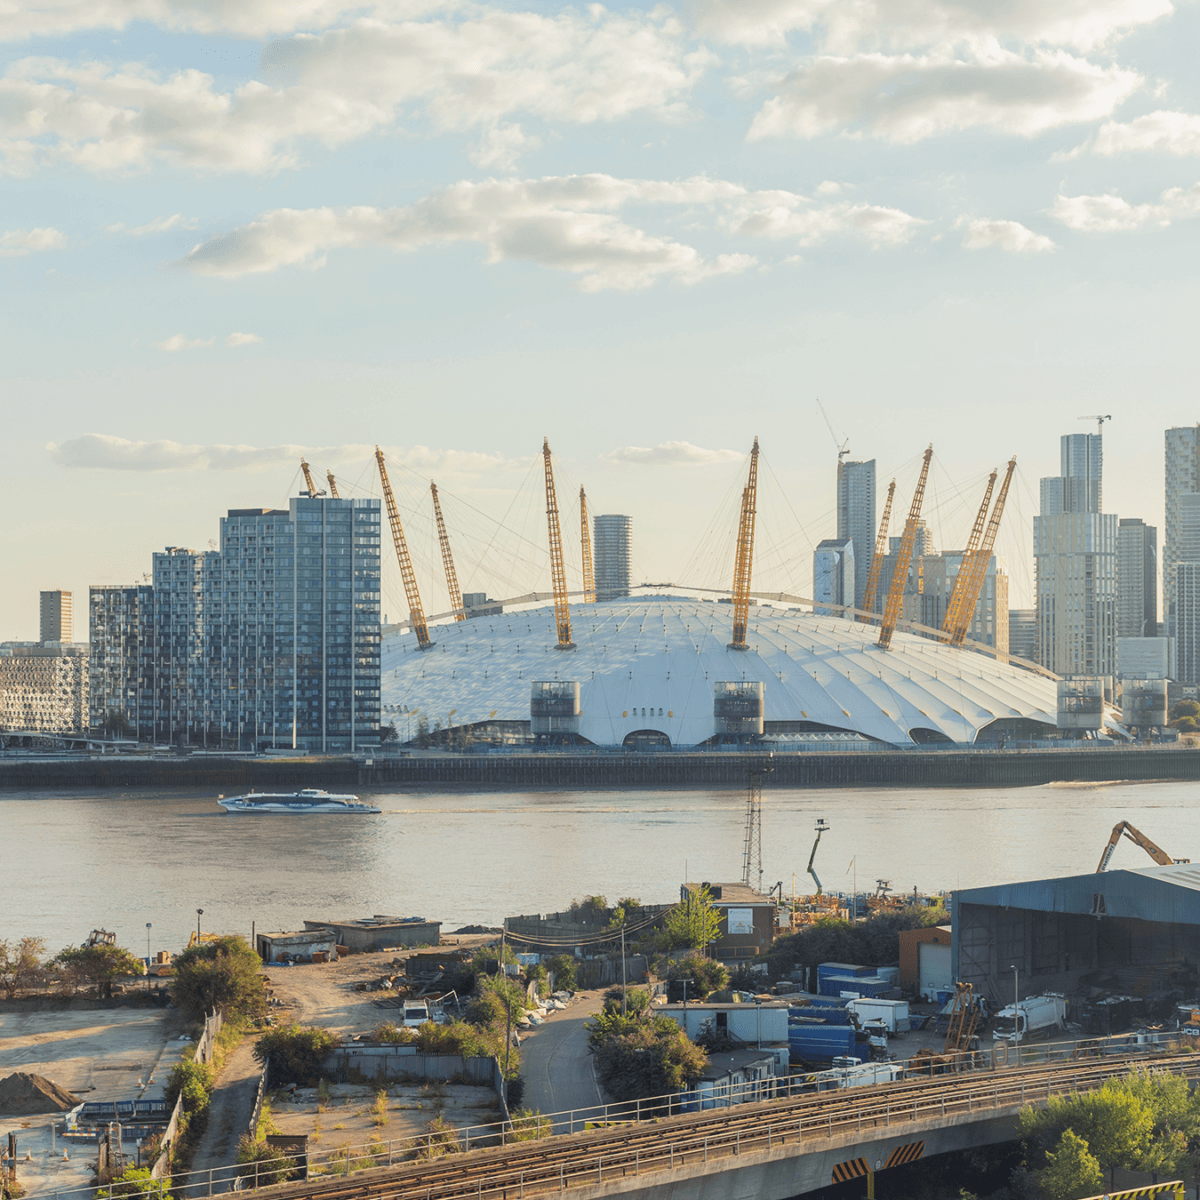 An photograph of the o2 arena in Greenwich, London, with the docklands skyline in the backgorund